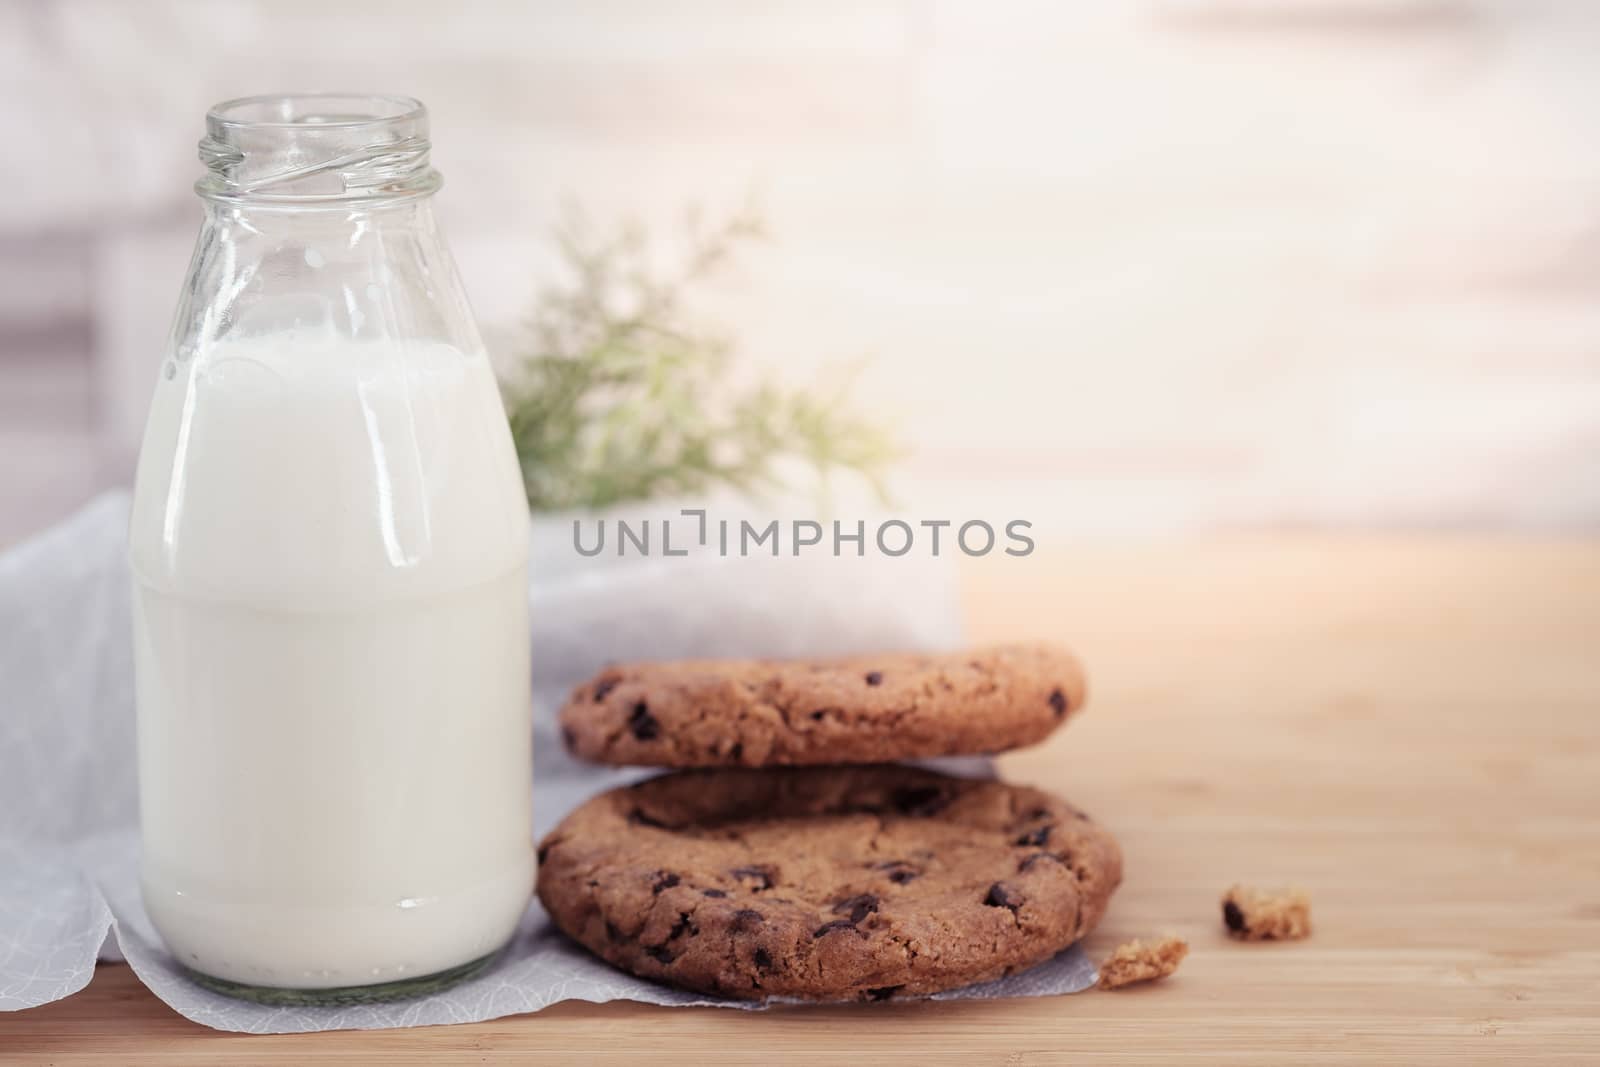 Chocolate chip cookies and a glass of milk on a  wooden table in warm light, Vintage look.